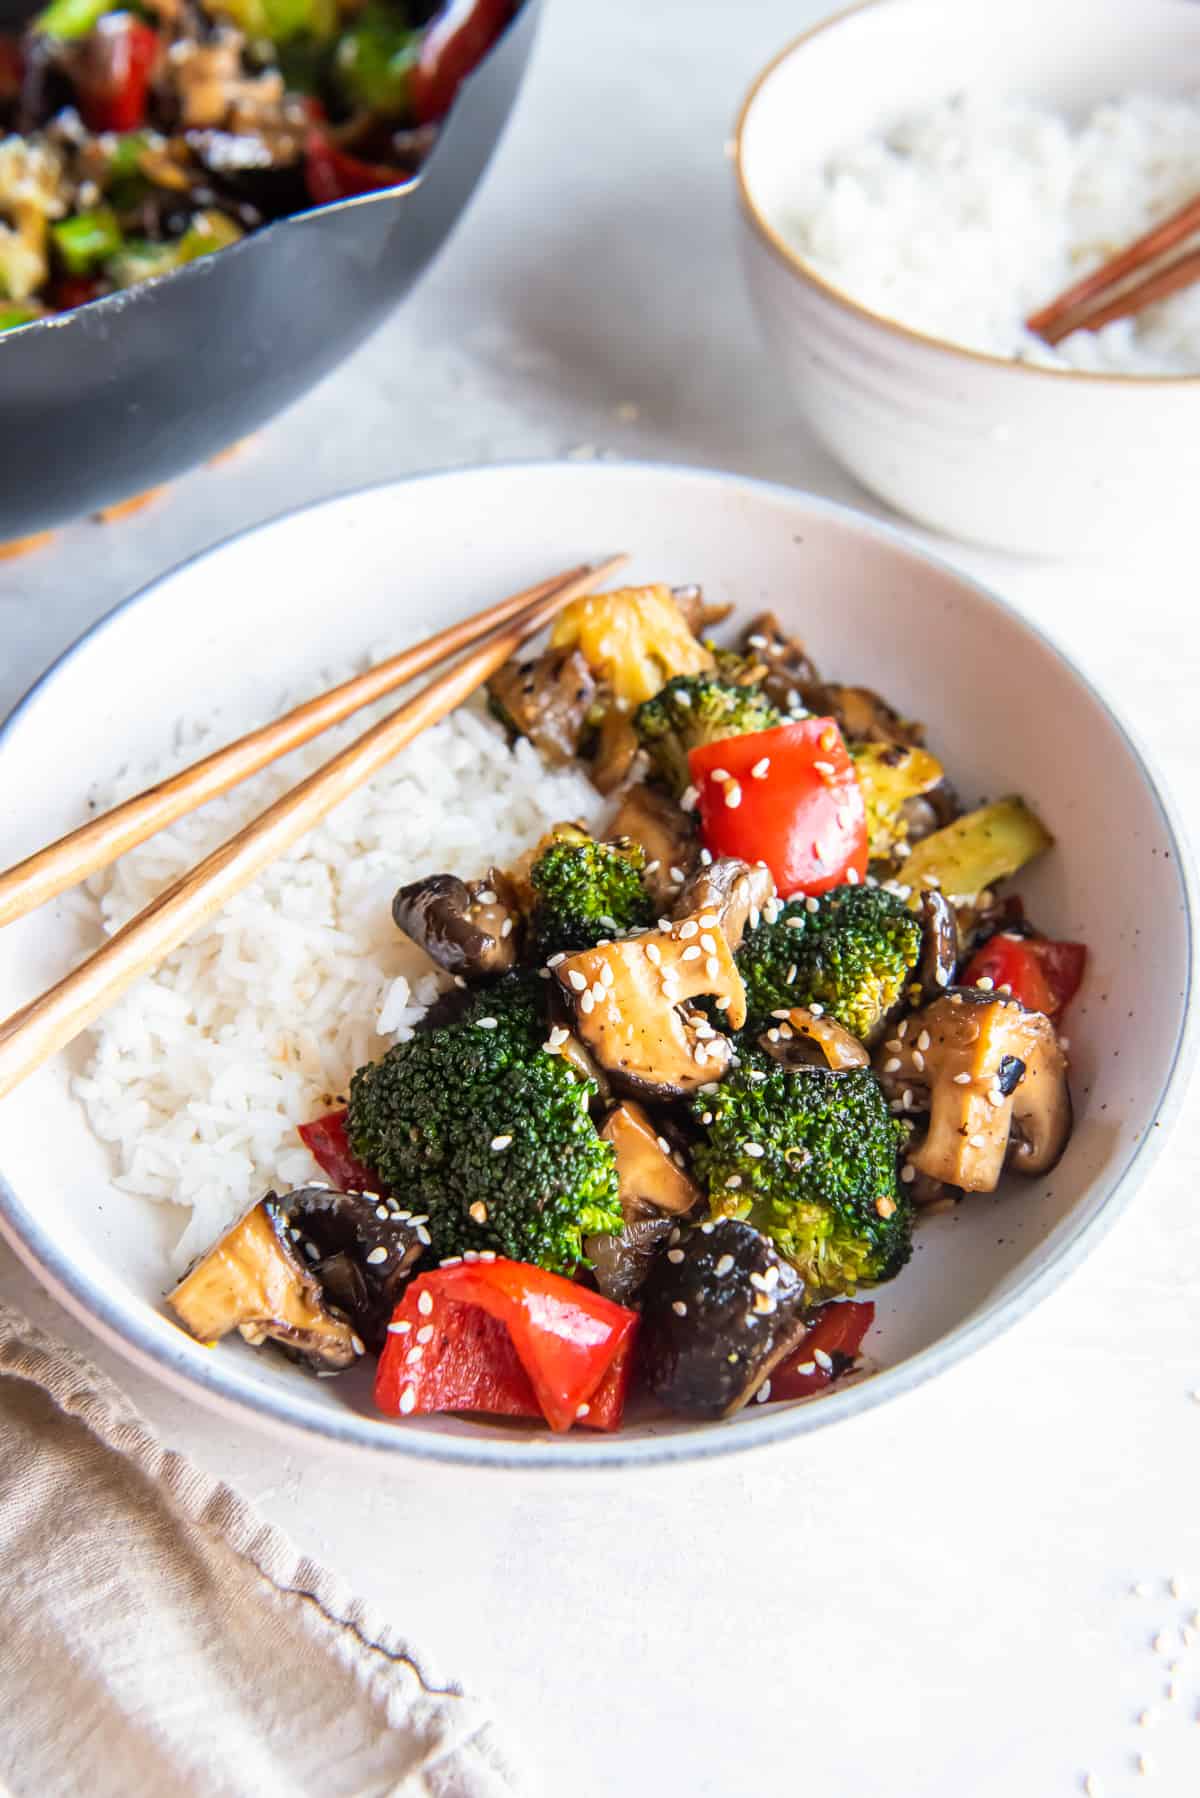 Broccoli mushroom stir fry in a bowl with white rice and chopsticks.